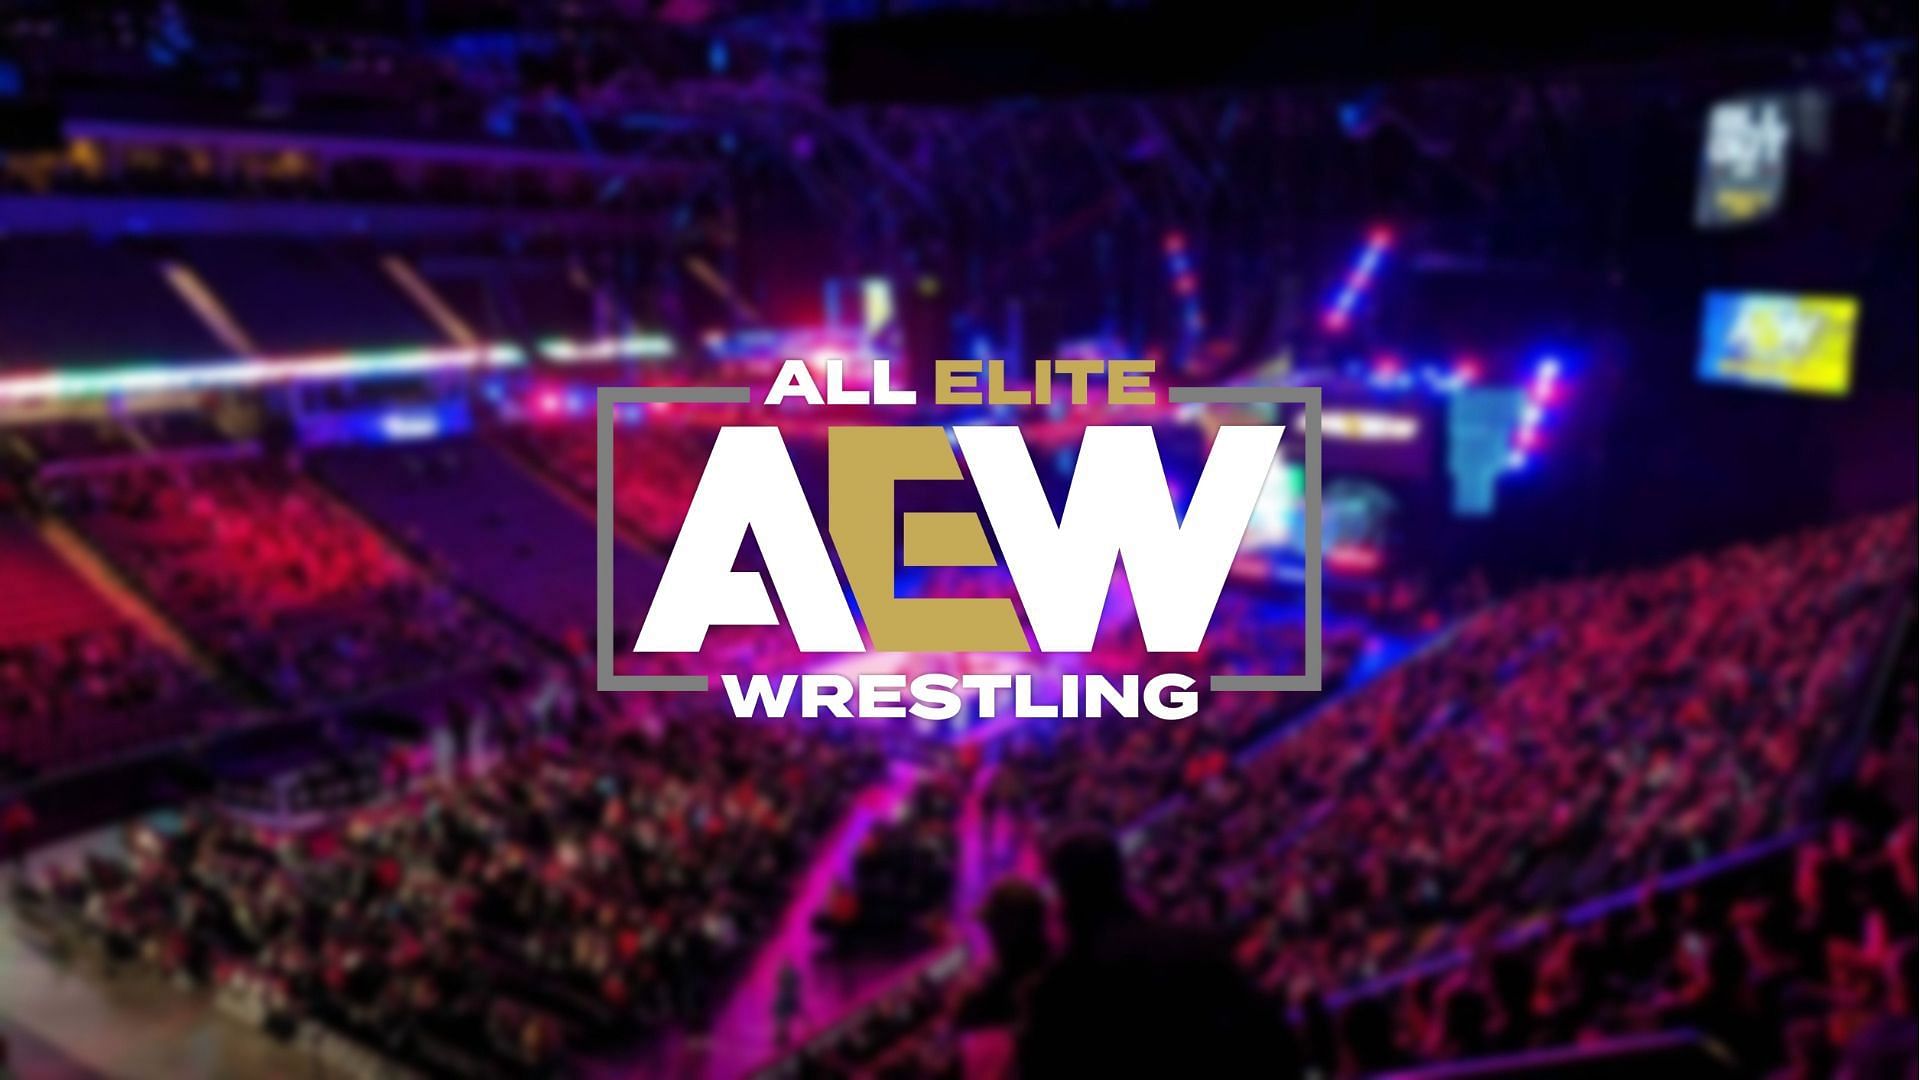 Find out which AEW star provided update on their current status